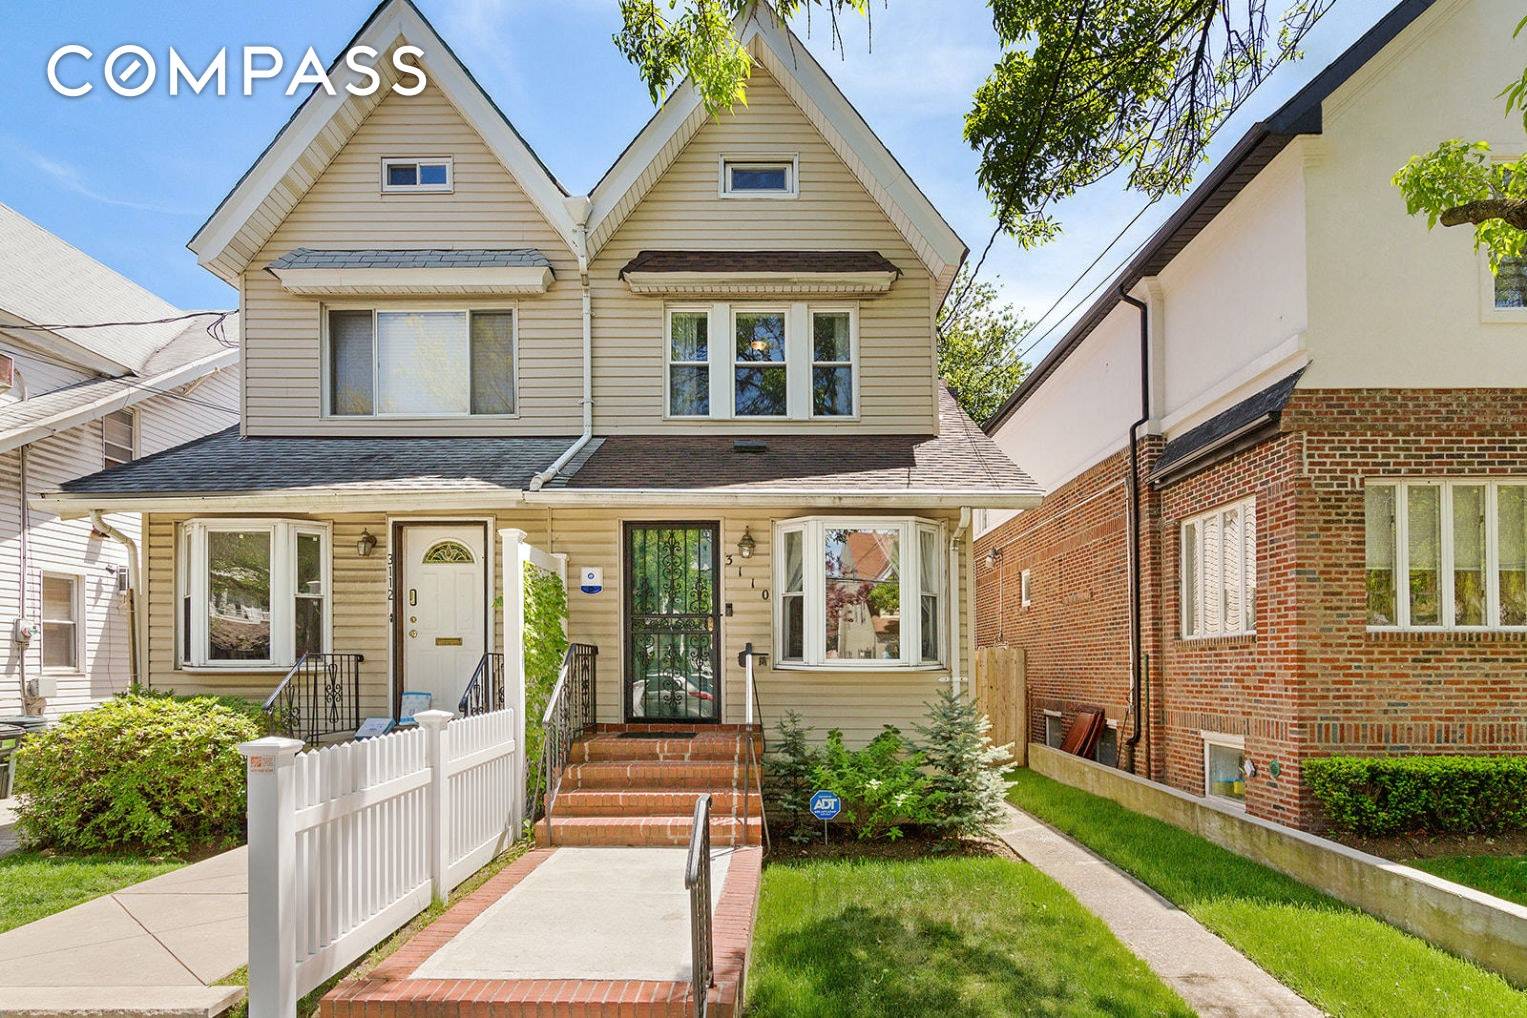 Midwood Gem ! This beautifully renovated 1 family home offers 2 levels, 4 bedrooms and 2.